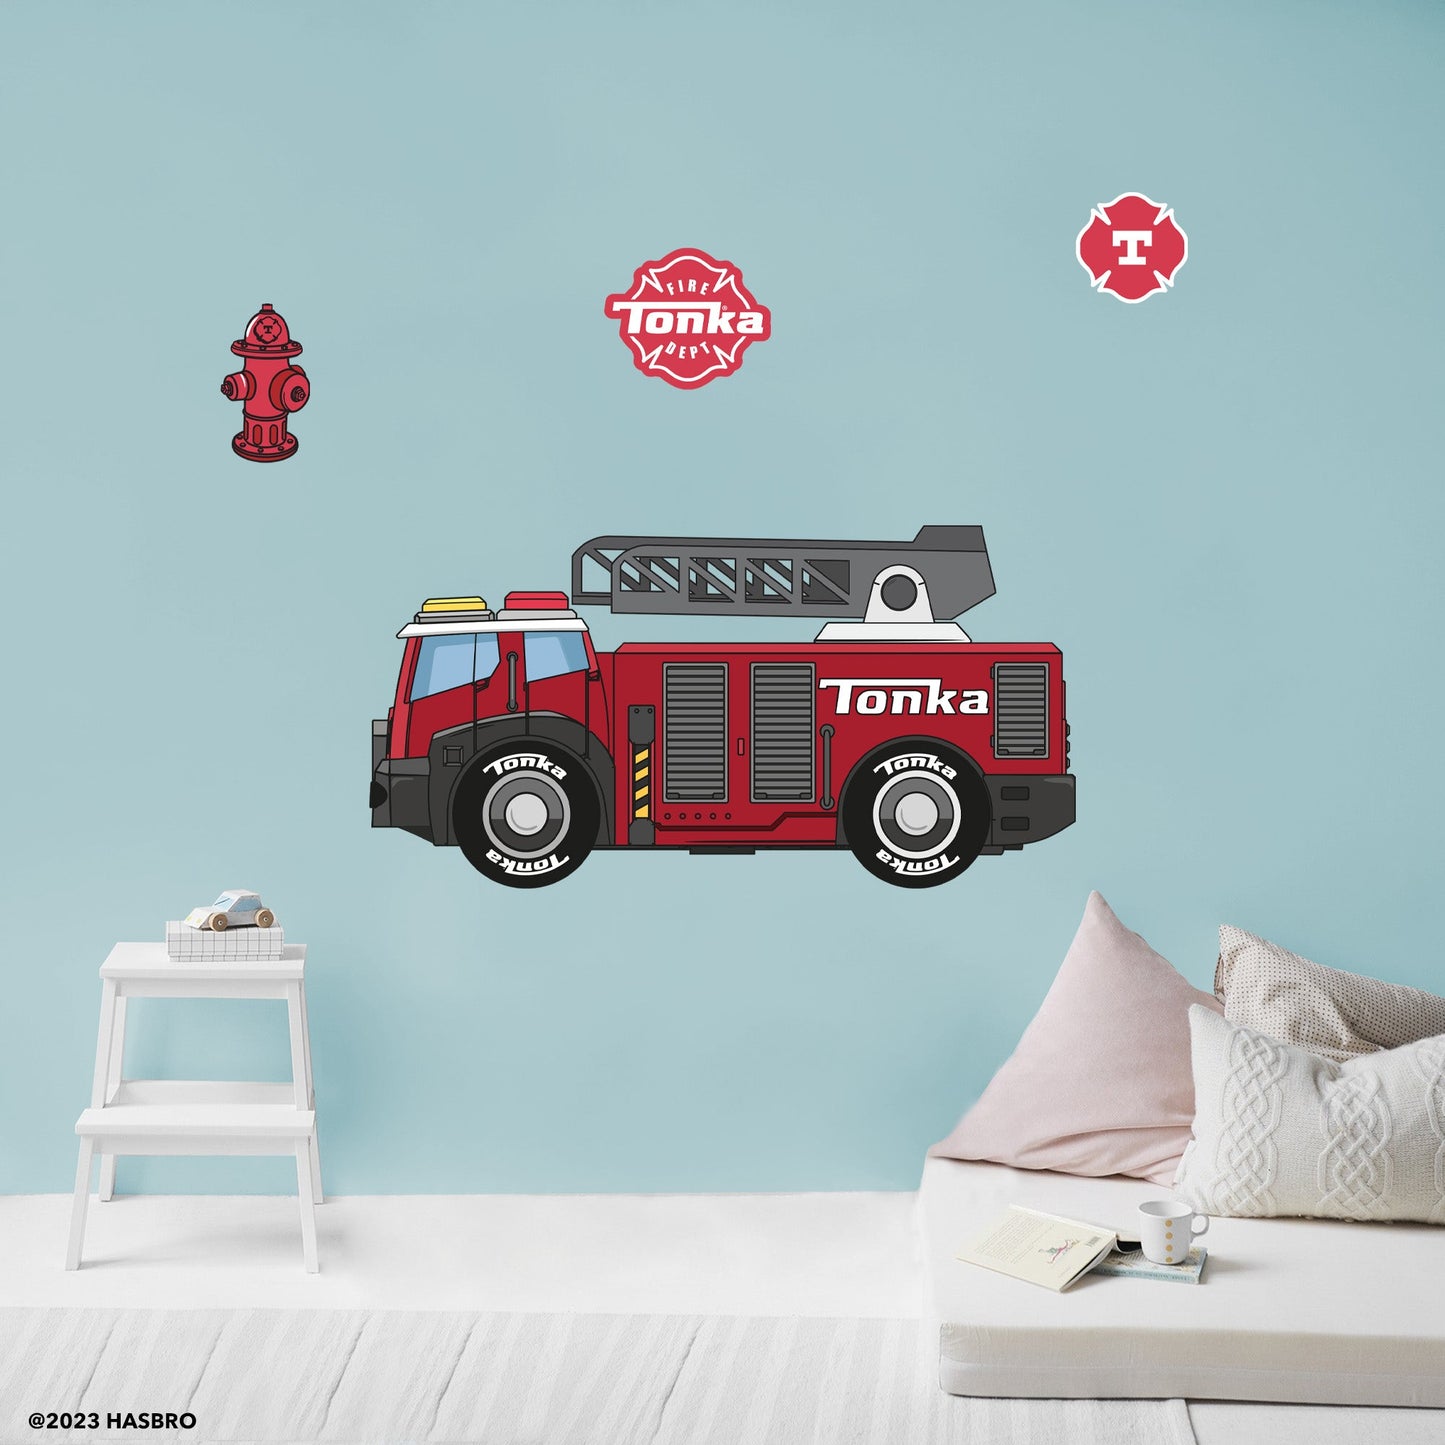 Tonka Trucks: Fire Truck Classic RealBig - Officially Licensed Hasbro Removable Adhesive Decal